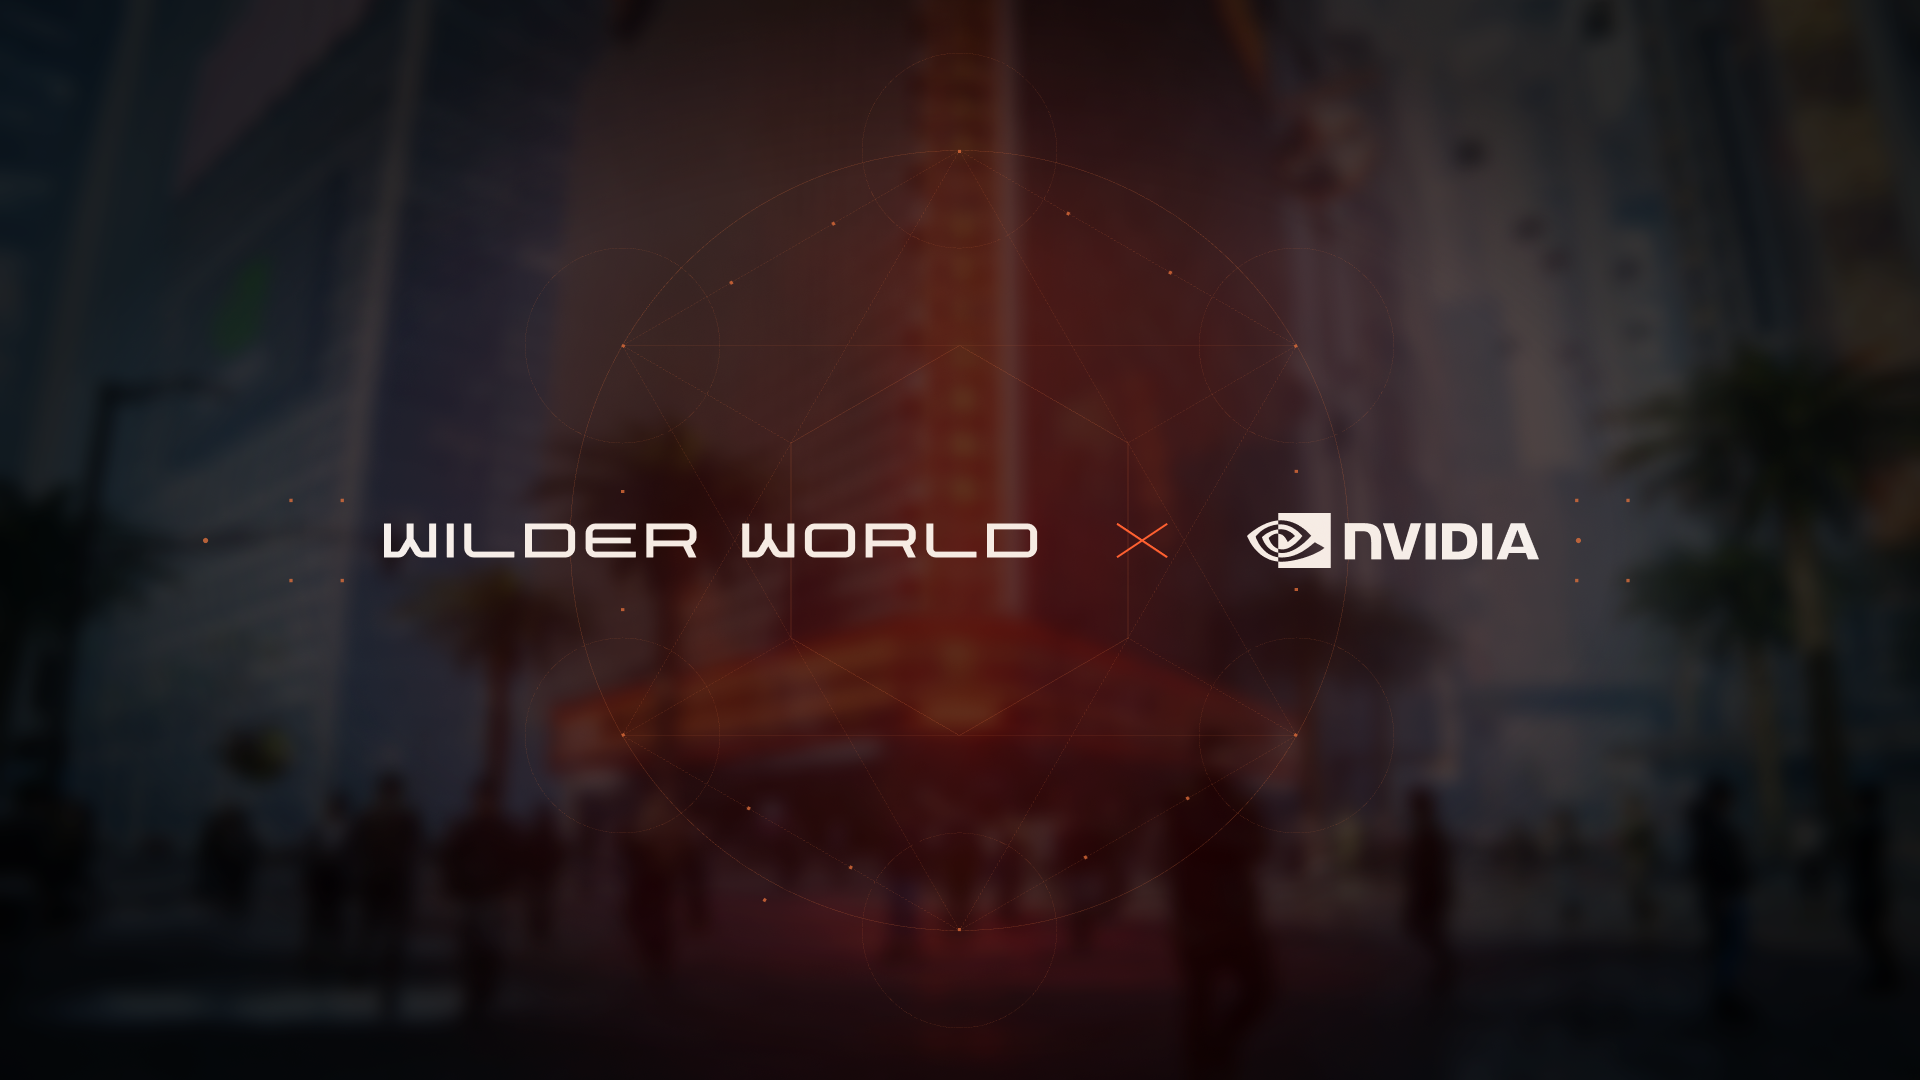 NVIDIA GeForce Now Teams Up with Wilder World to Revolutionize Cloud Gaming